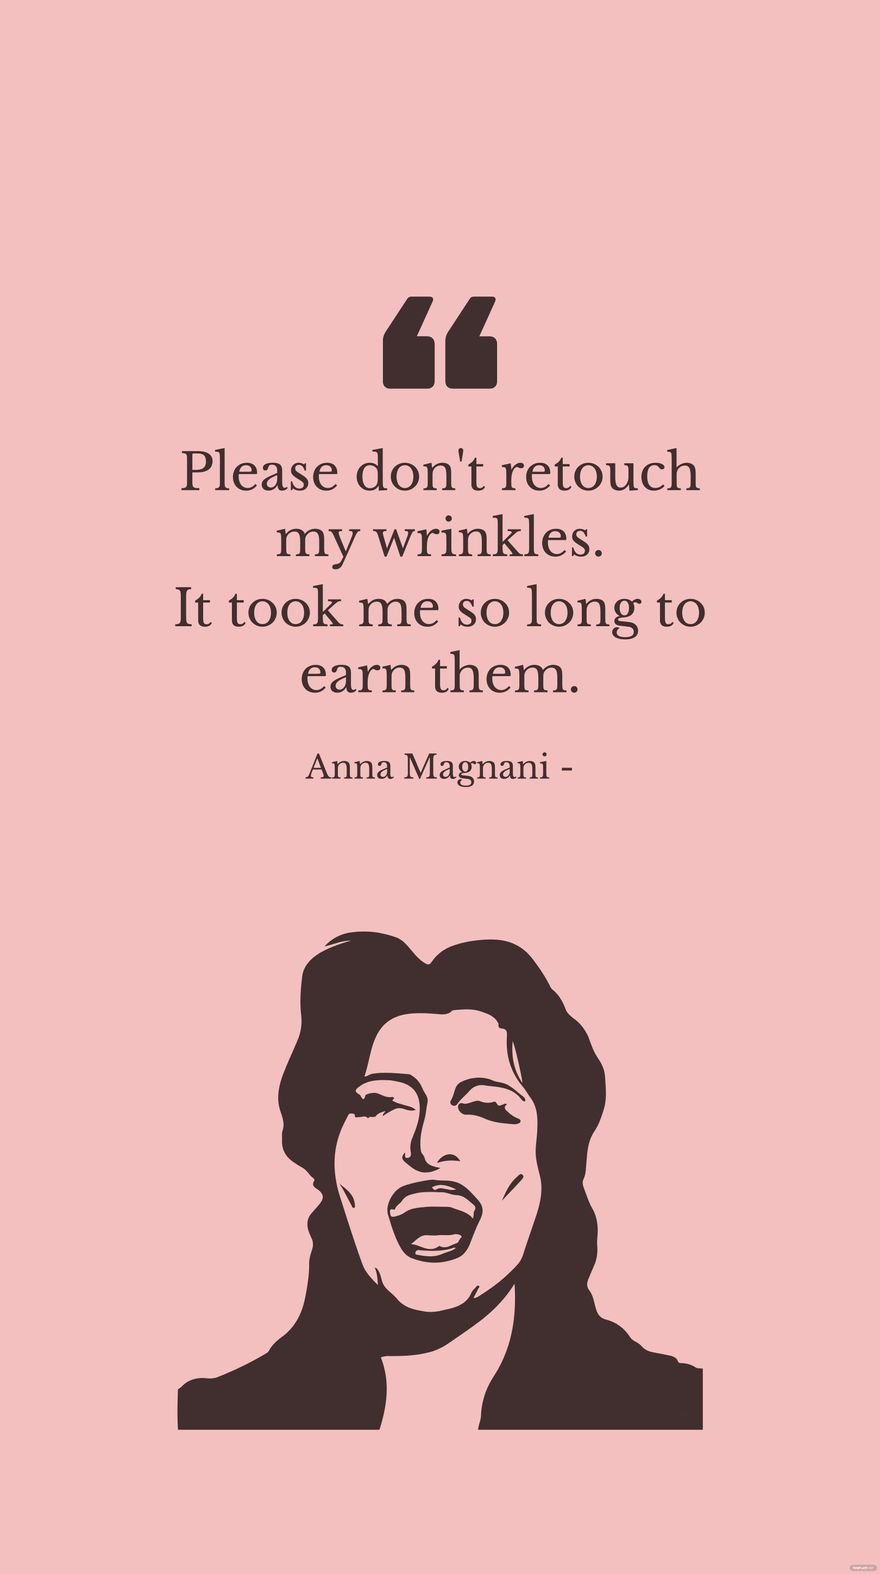 Free Anna Magnani - Please don't retouch my wrinkles. It took me so long to earn them. in JPG